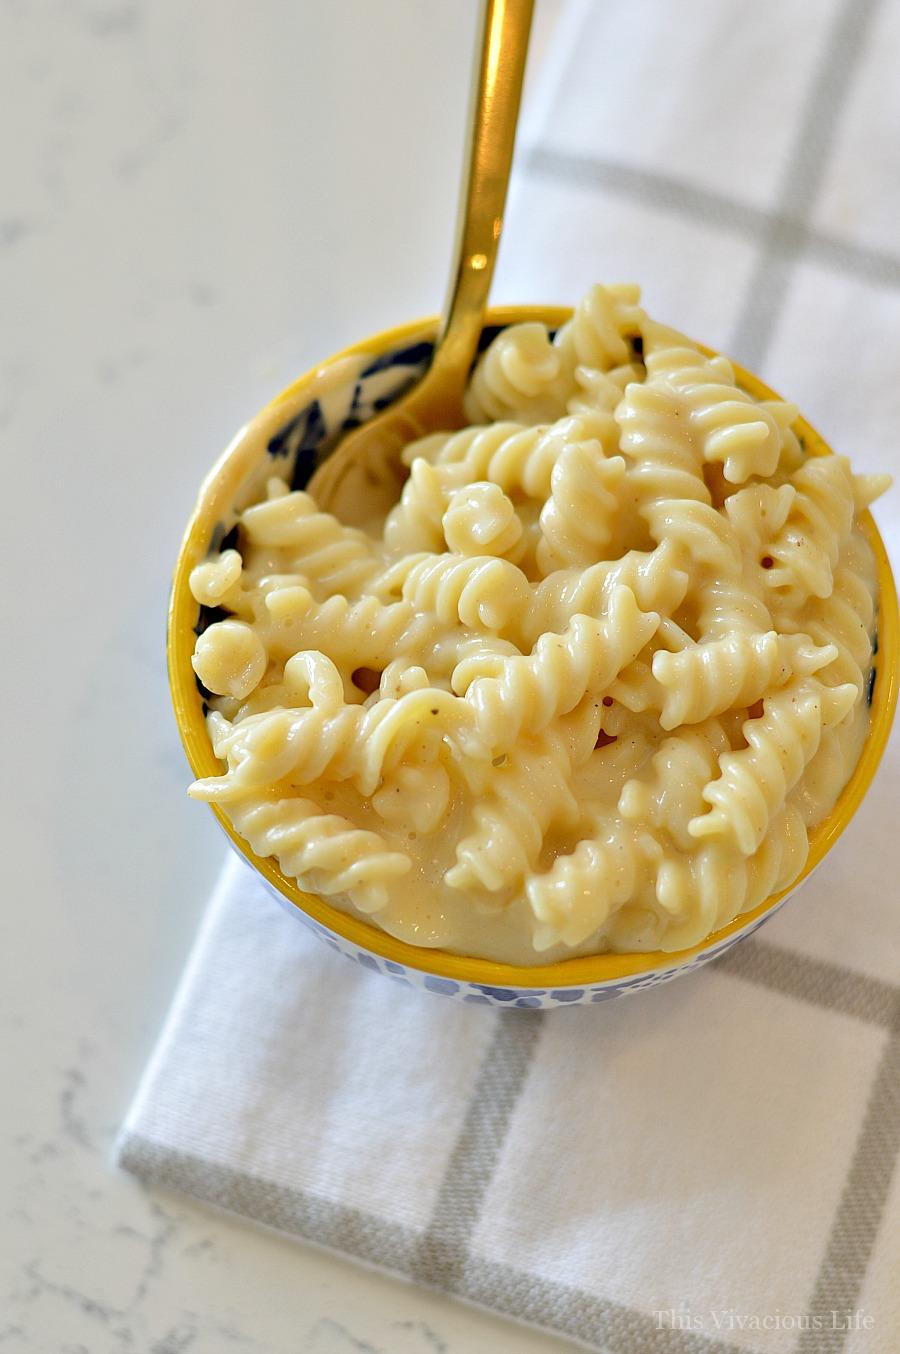 https://www.thisvivaciouslife.com/wp-content/uploads/2018/04/Instant-Pot-Gluten-Free-Mac-and-Cheese4.jpg